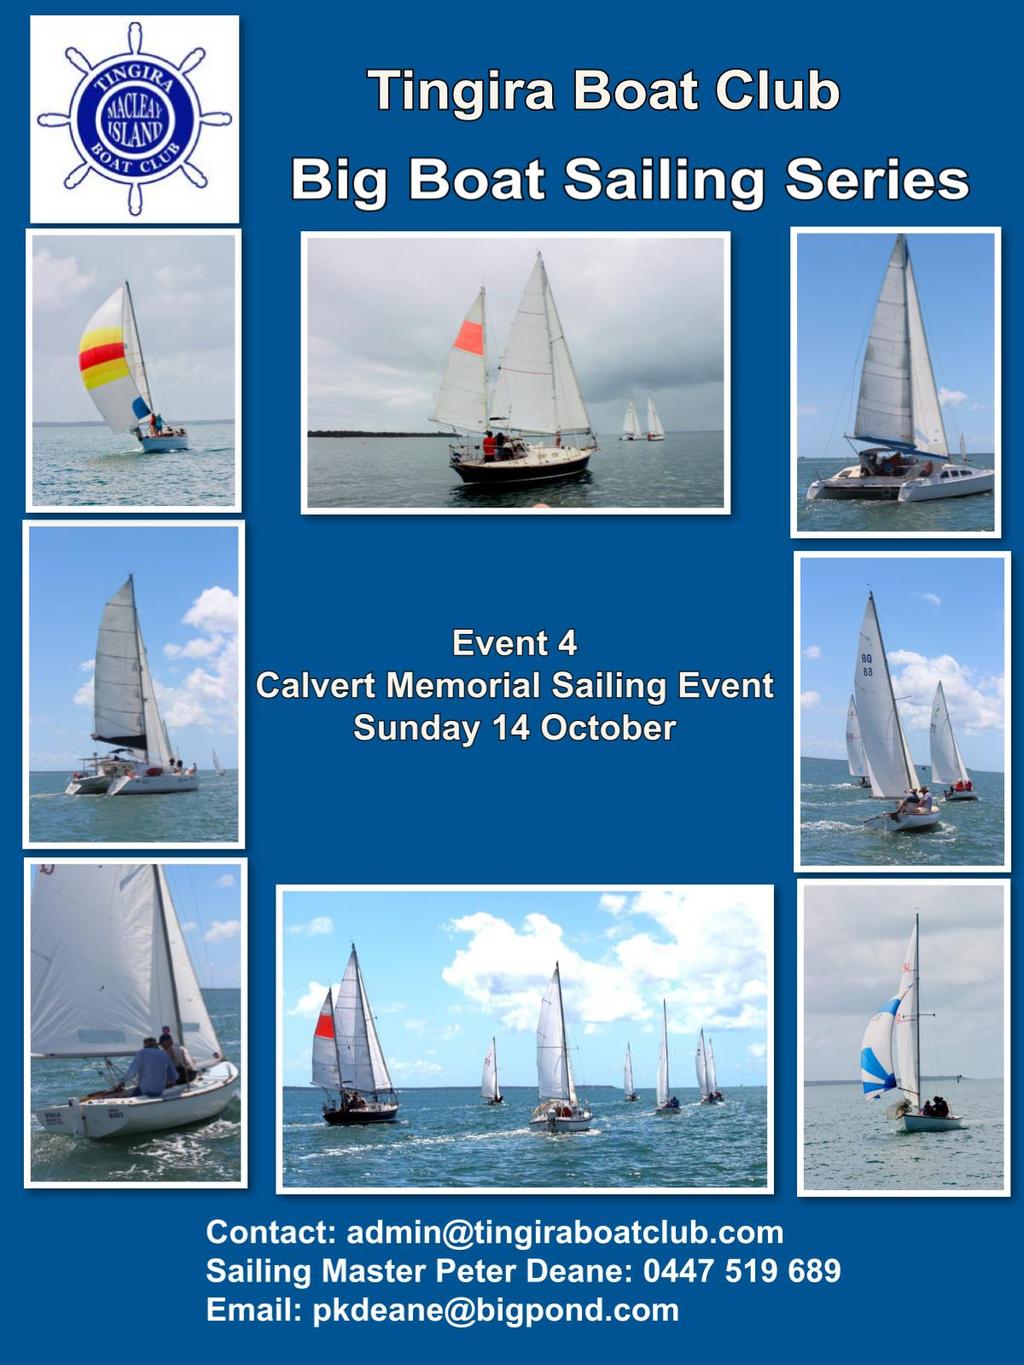 Calvert Memorial Dinner The Calvert Trophy and prizes for the Big Boat Sailing Series will be awarded at the Calvert Memorial Dinner to be held on Saturday 20 October.